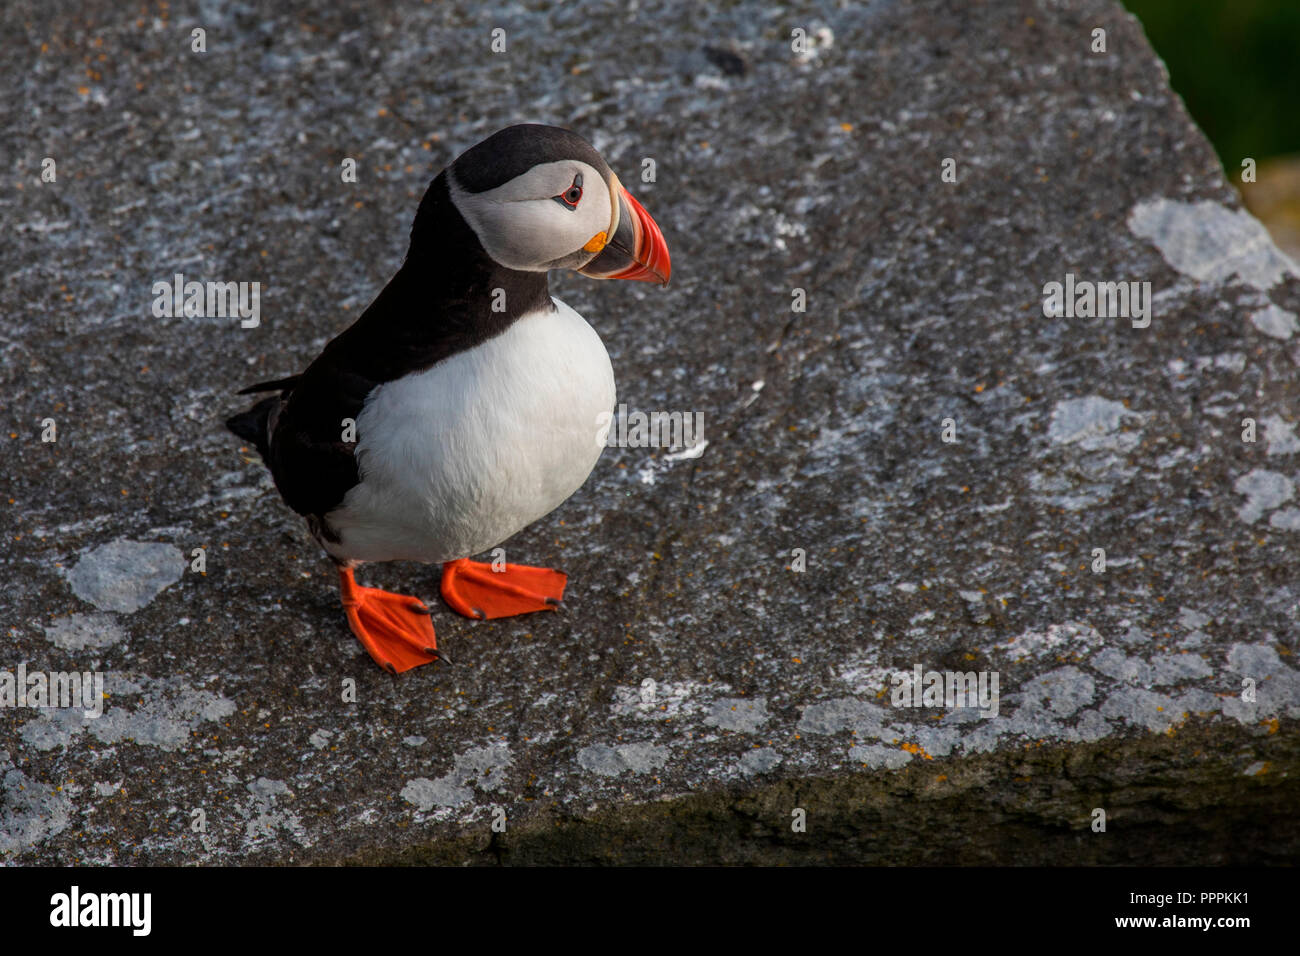 Puffin (Fratercula arctica), Runde, More og Romsdal, Norway Stock Photo